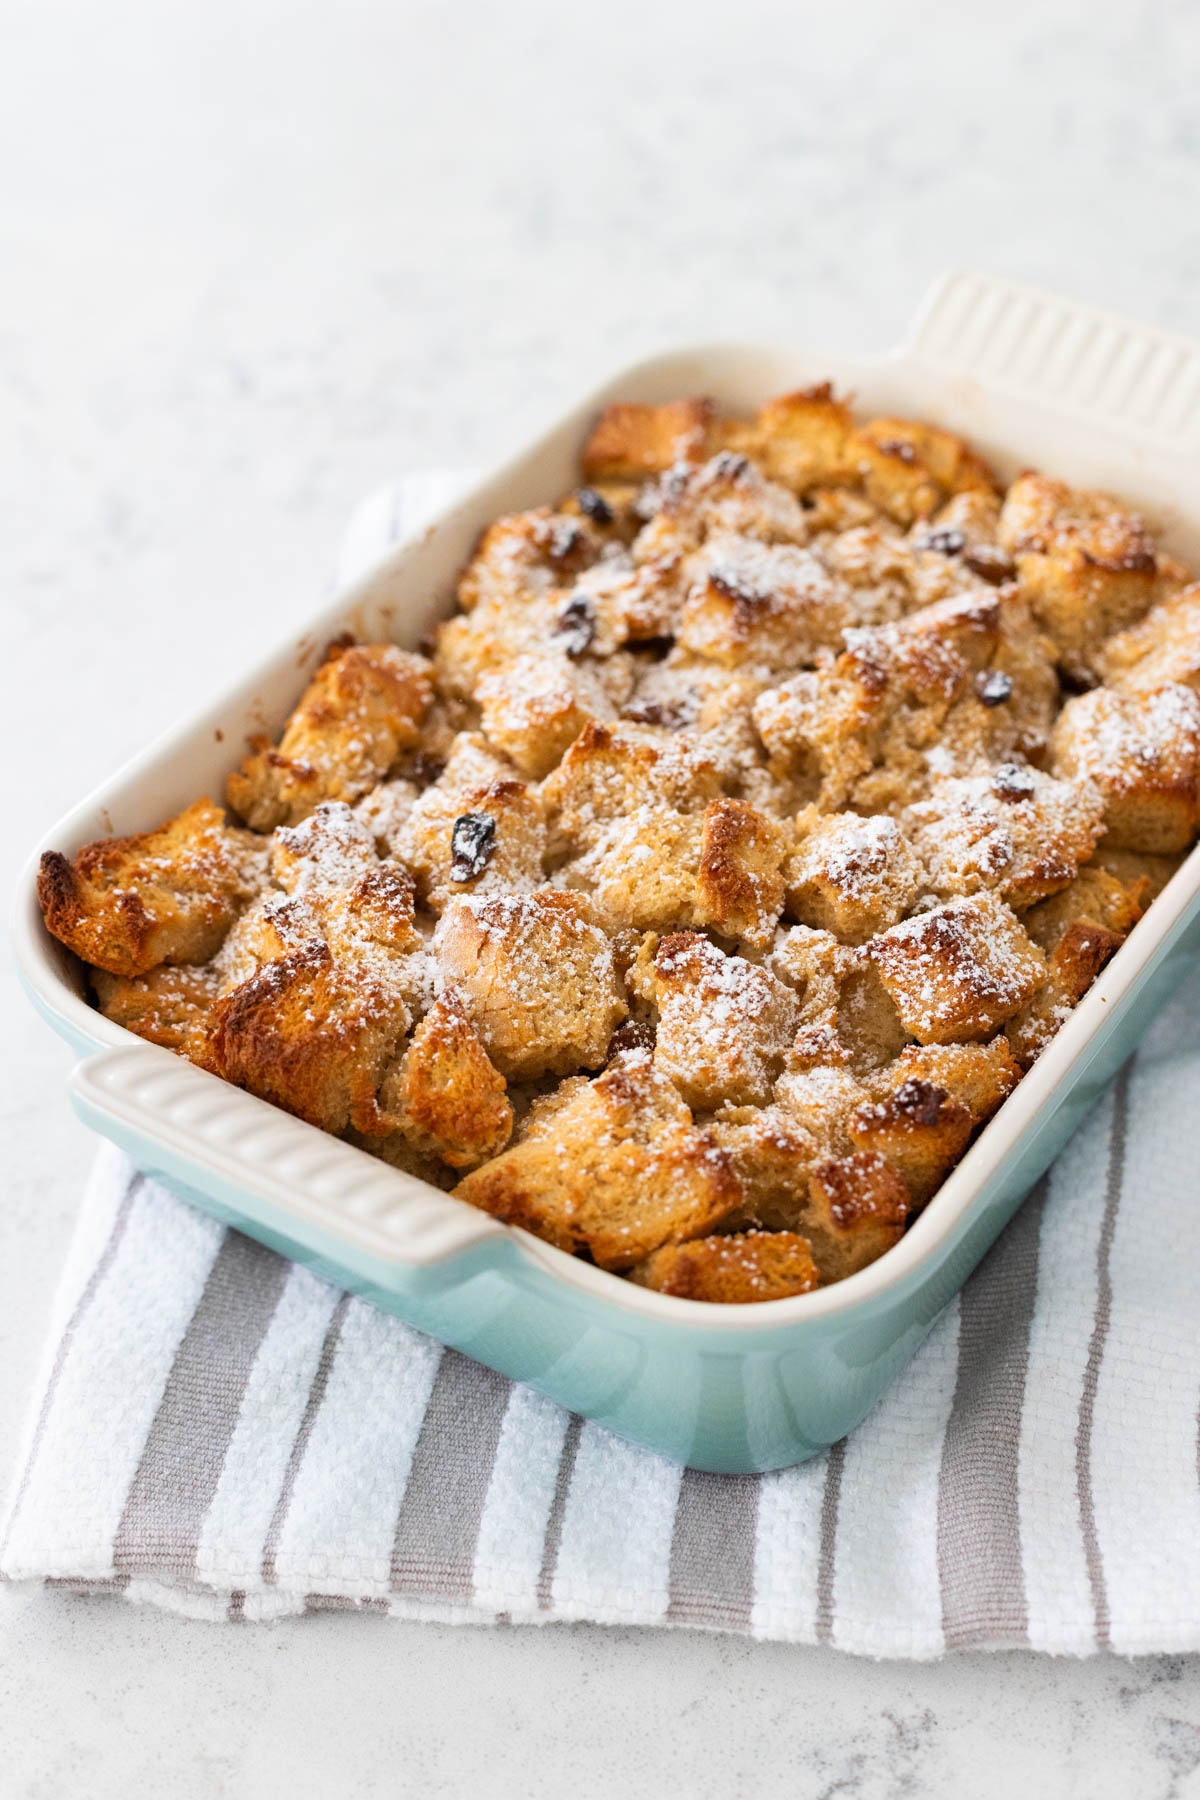 The baked bread pudding is golden brown. The dish sits on a towel as it cools. Powdered sugar has been sprinkled over the top for garnish.